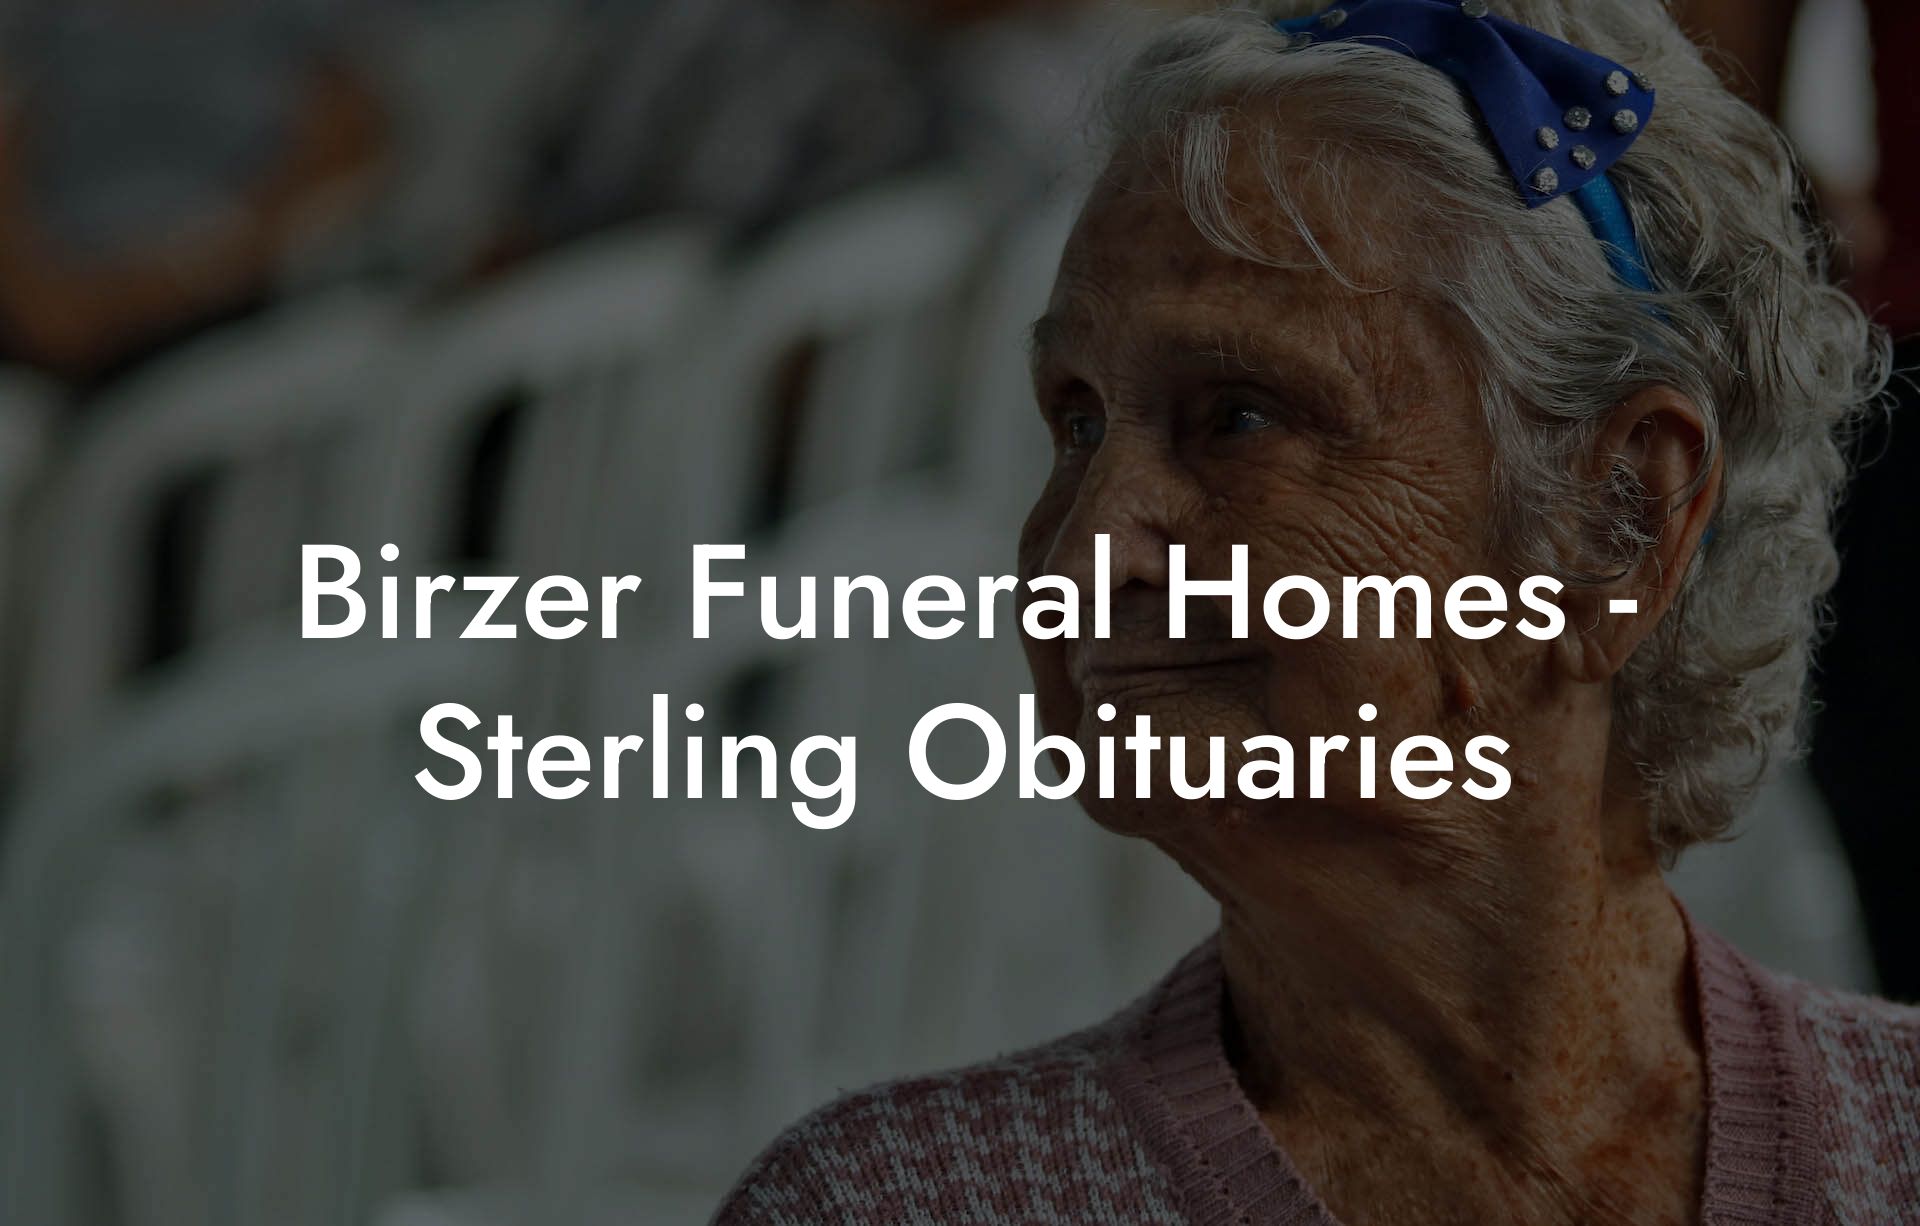 Birzer Funeral Homes - Sterling Obituaries